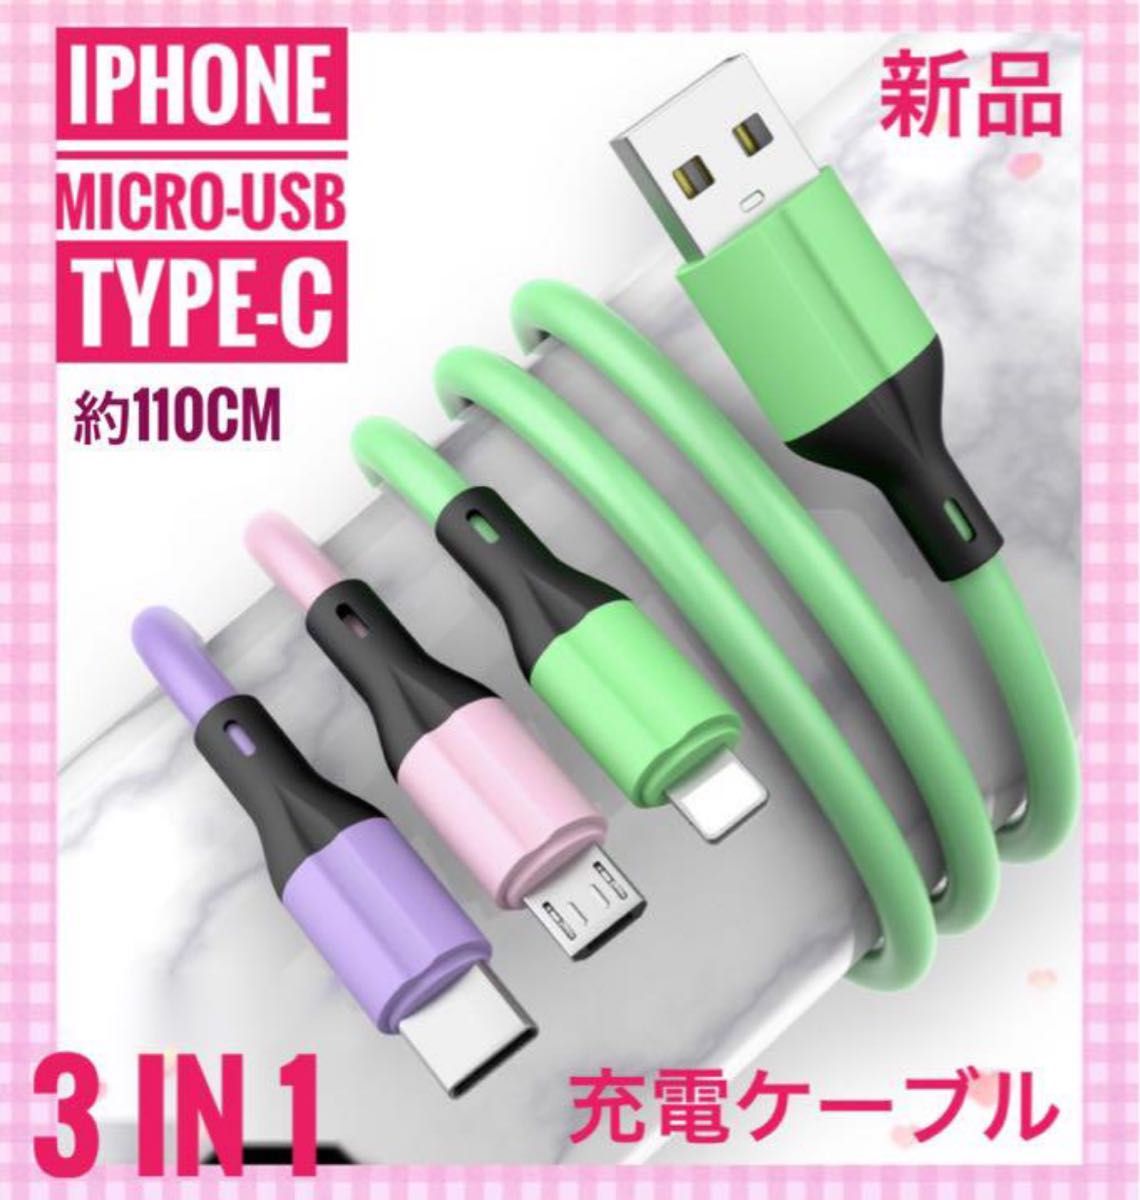 USB 充電ケーブル　iPhone アイフォン　3in1 Android Type-c MICRO